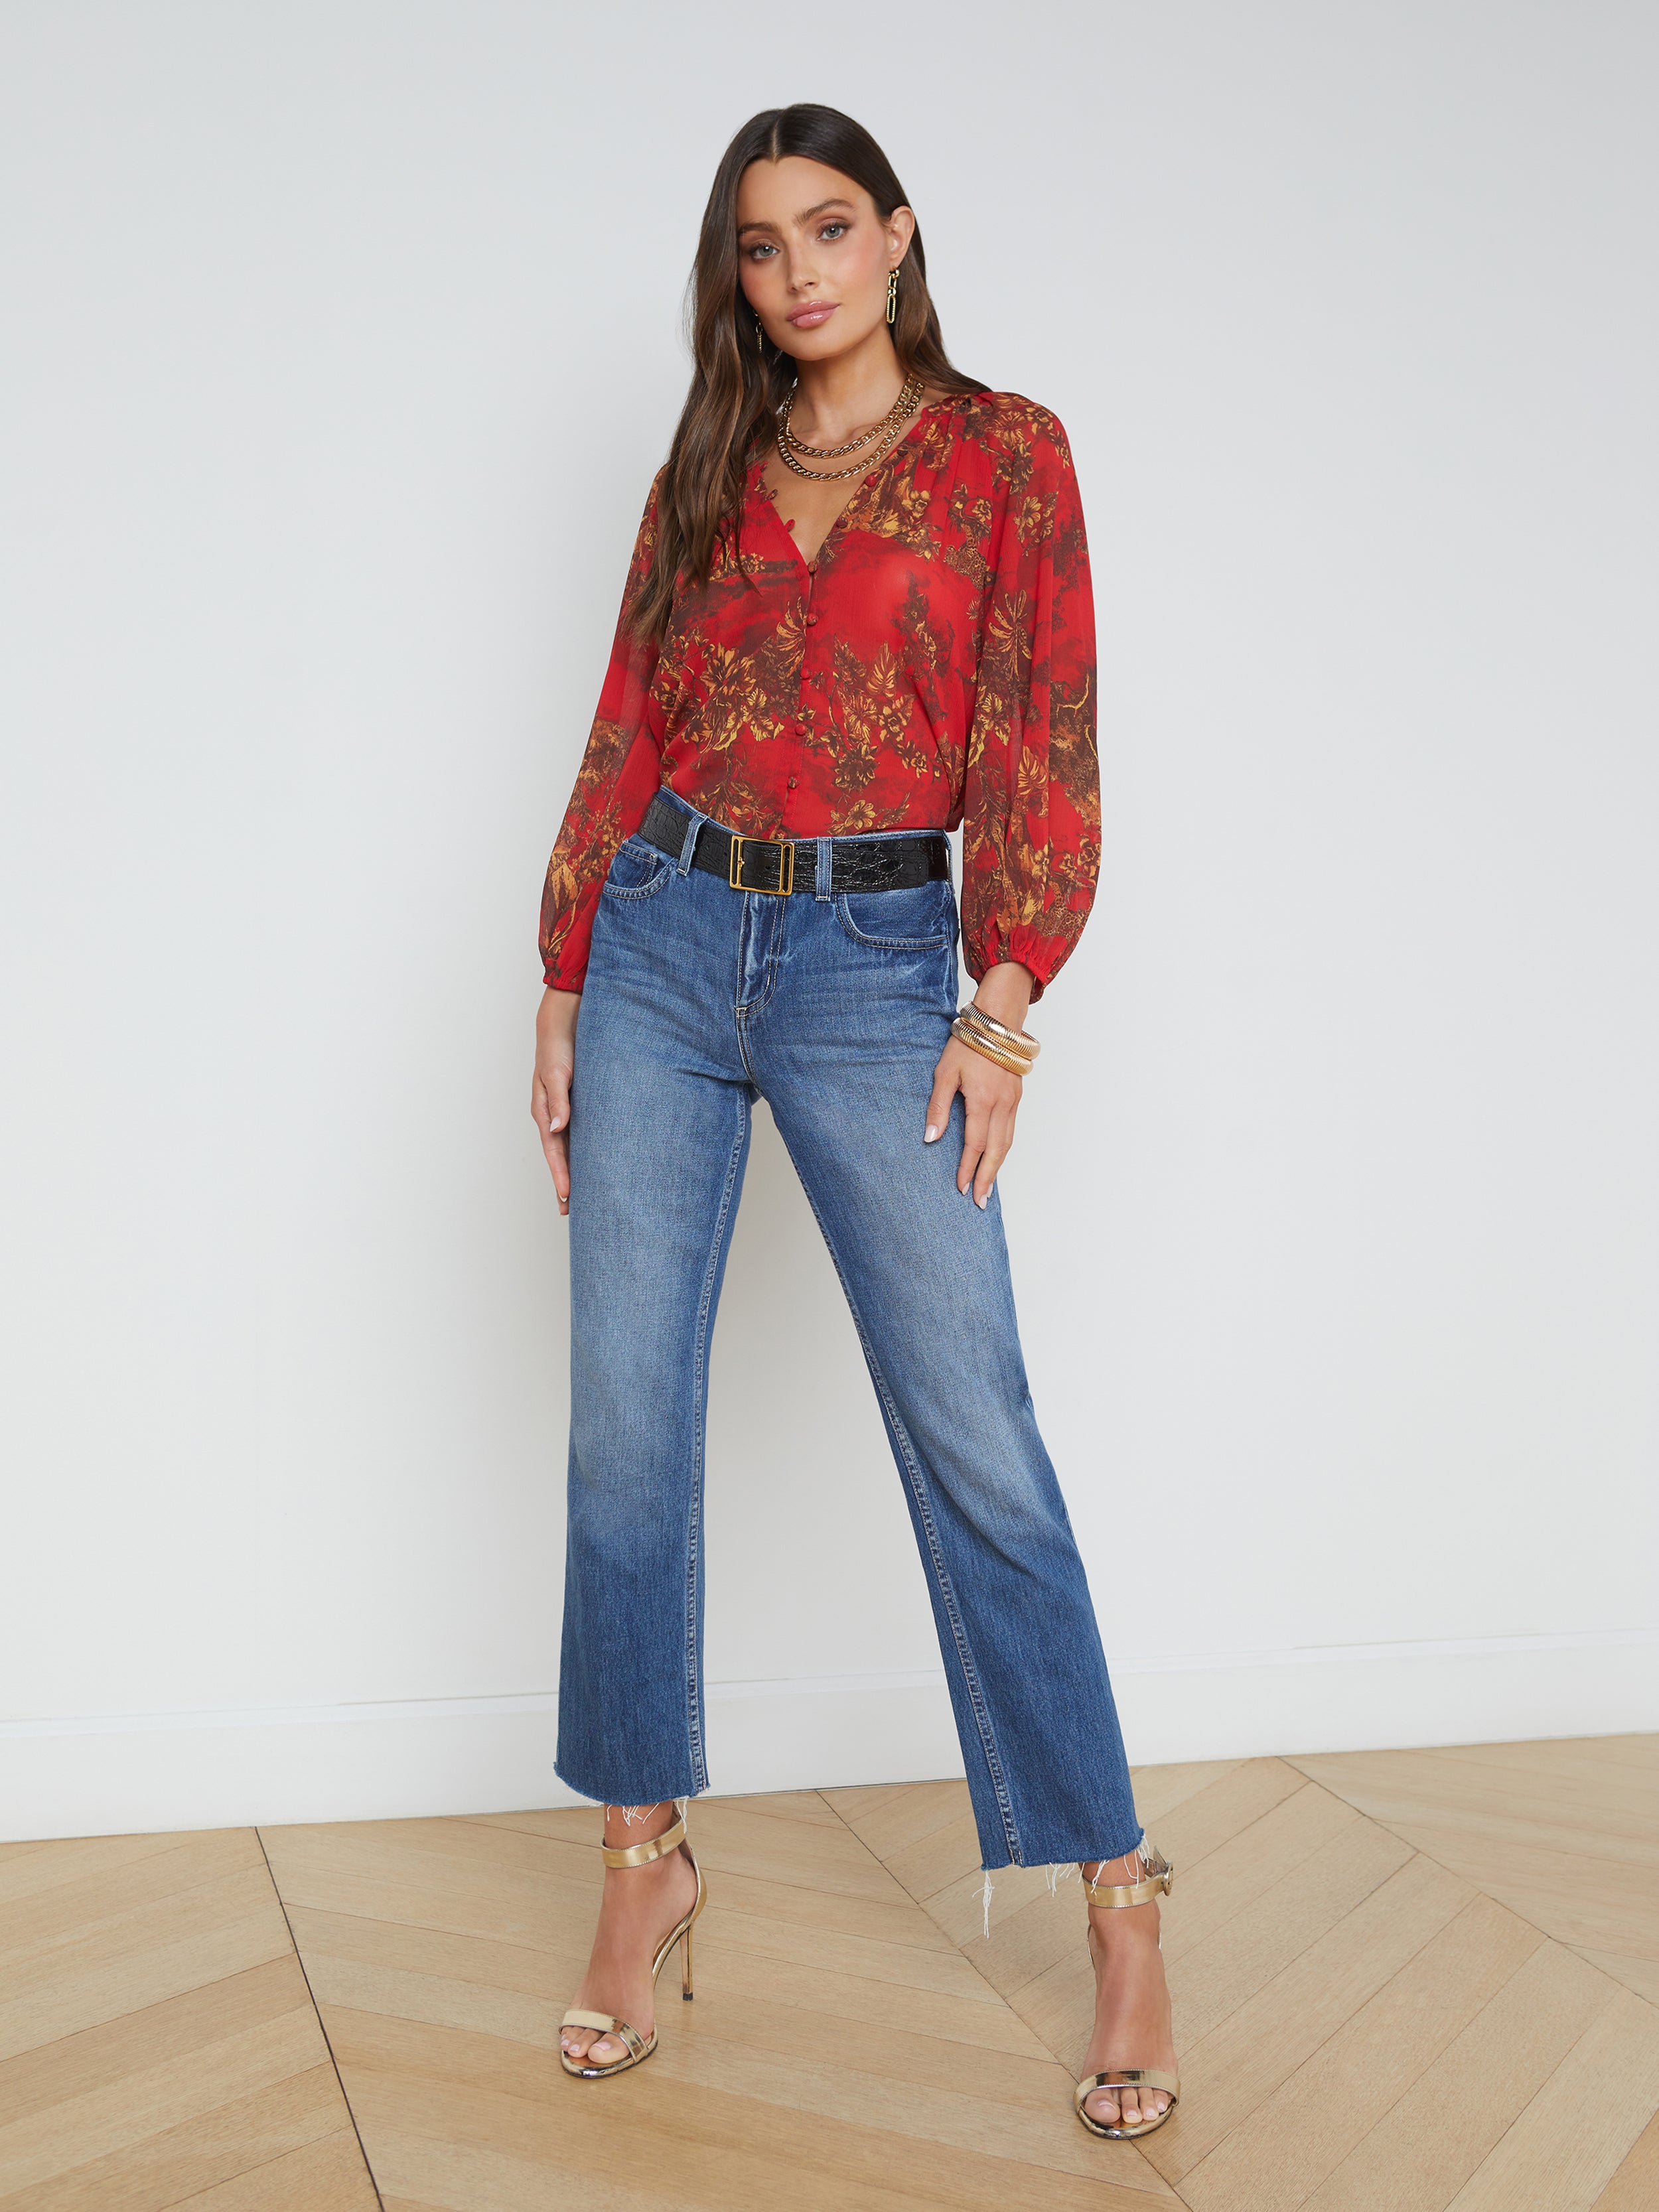 Featured: Milana Slouchy Stovepipe Jean